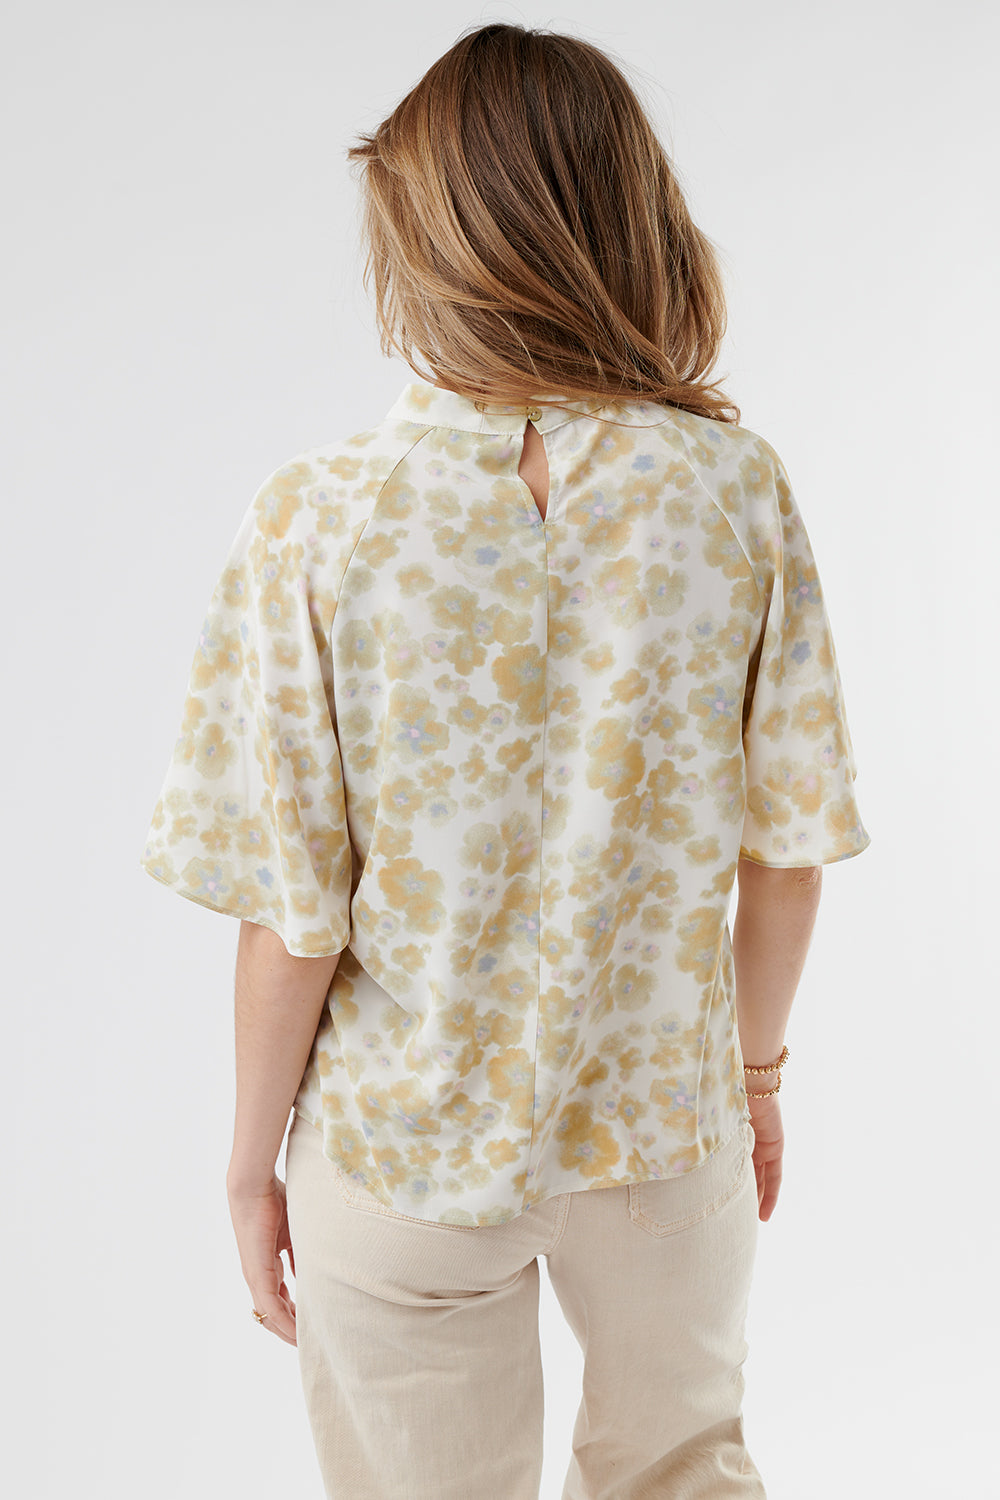 Always Lovely Yellow Floral Top